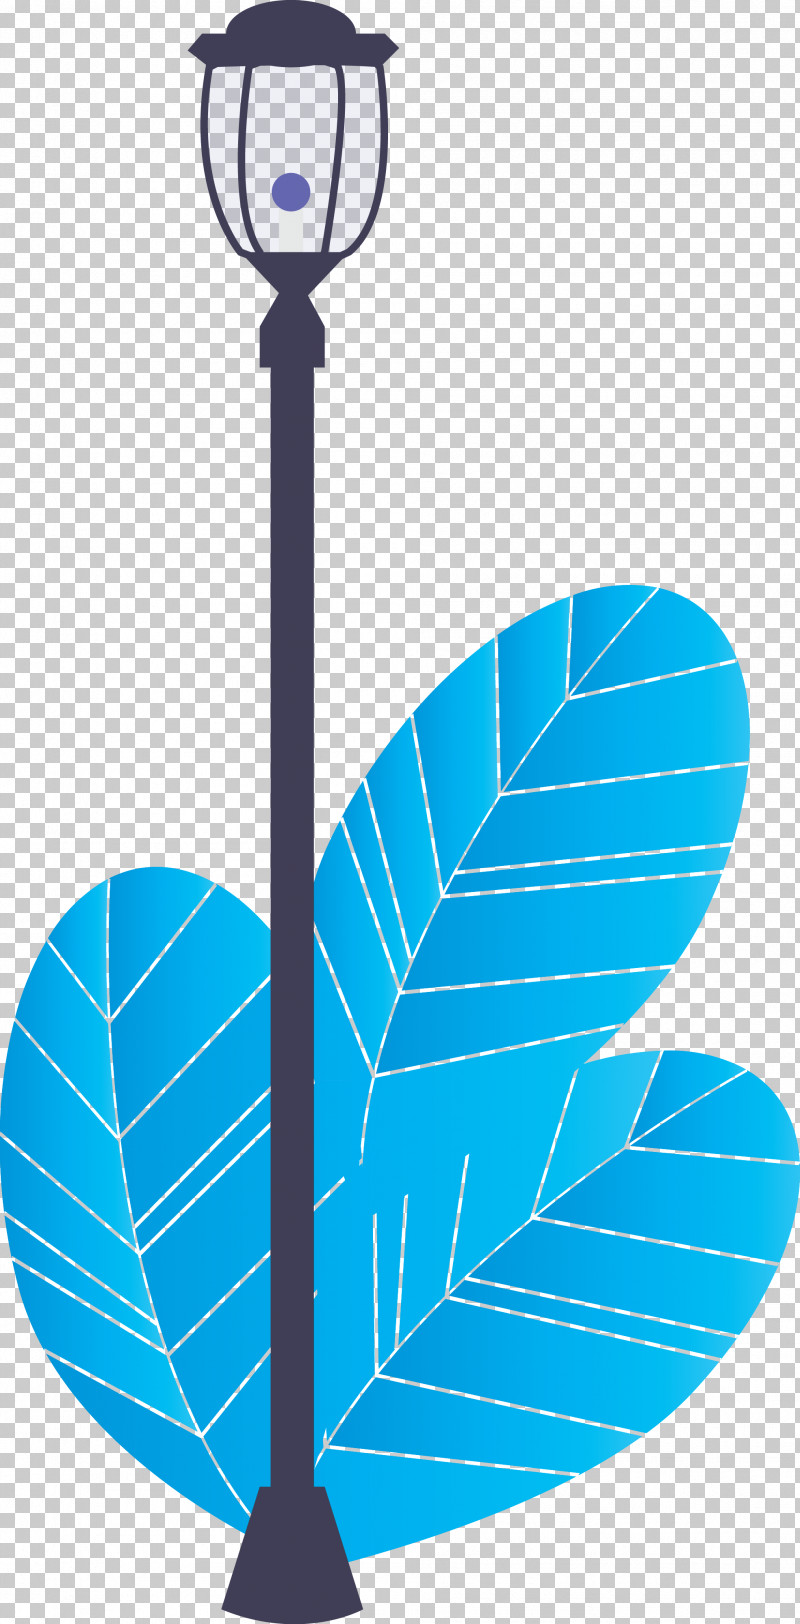 Street Light Tree PNG, Clipart, Leaf, Street Light, Teal, Tree, Turquoise Free PNG Download